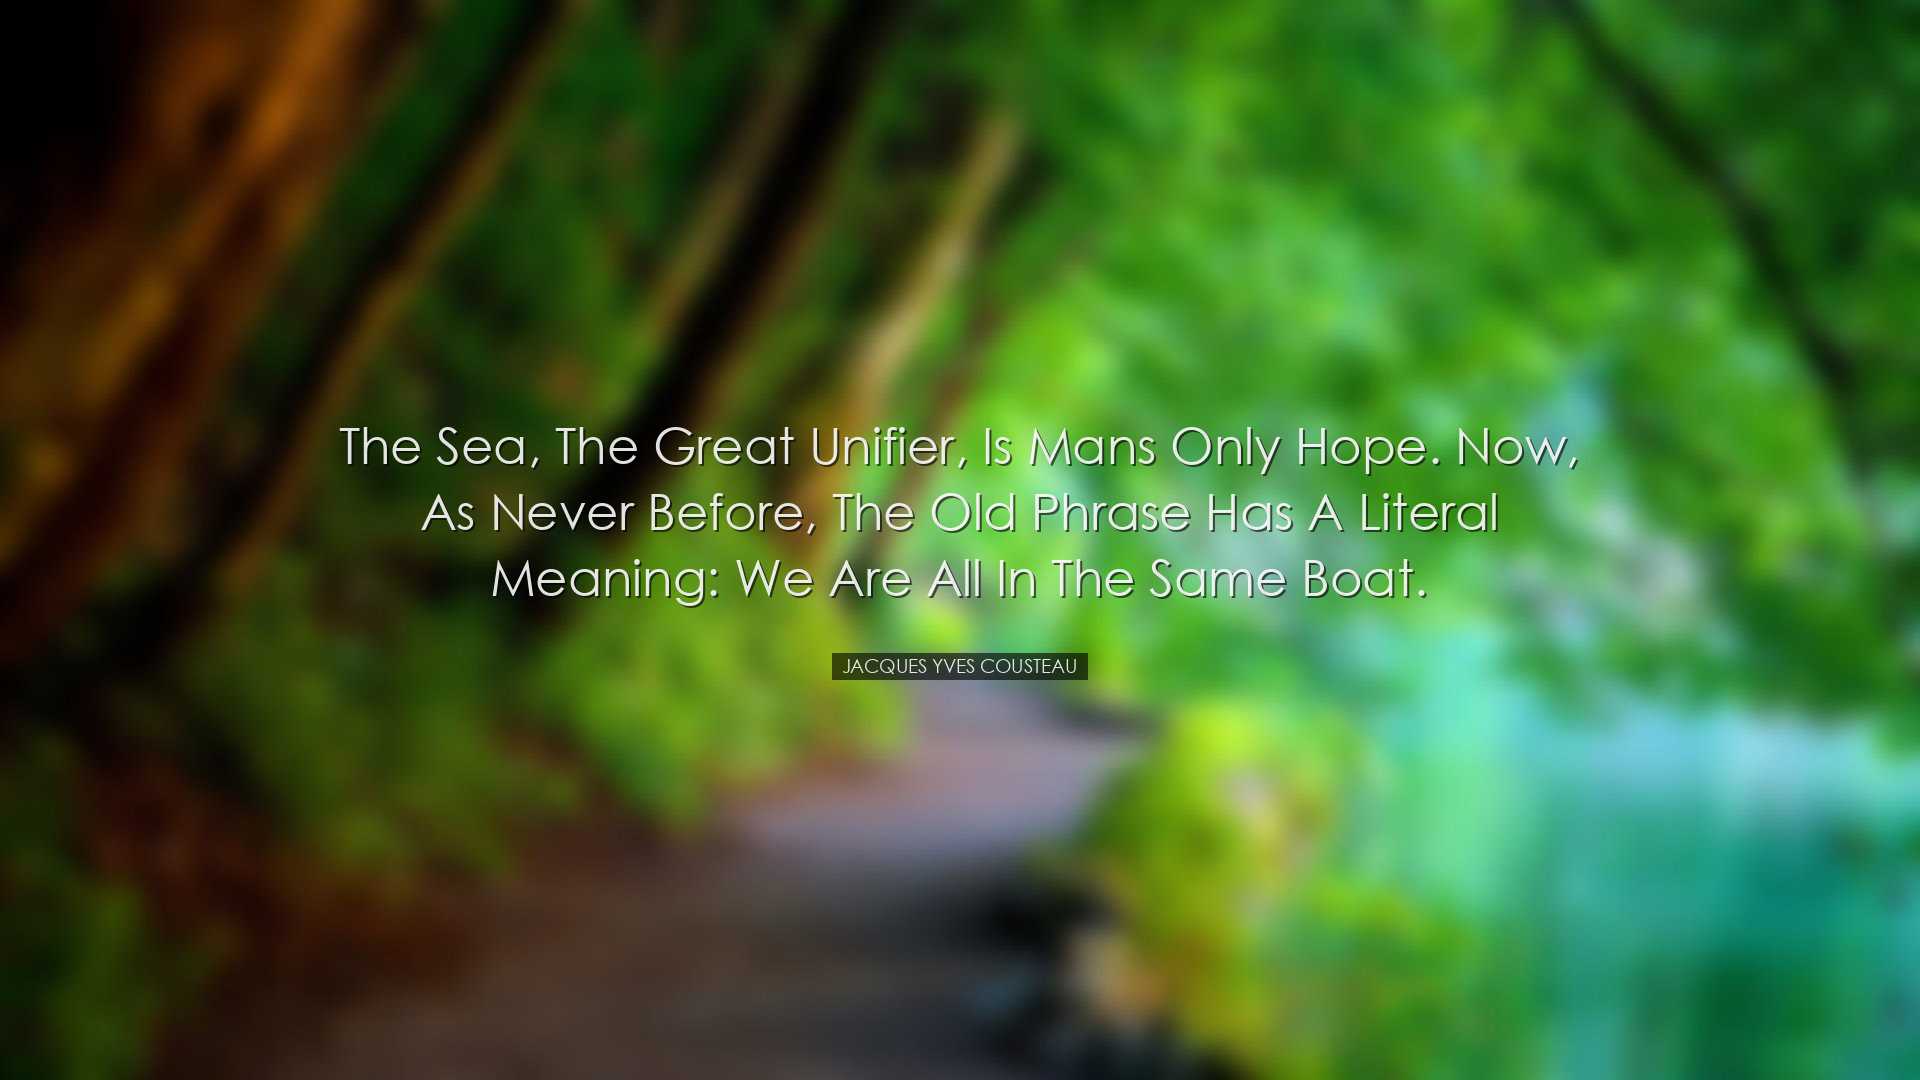 The sea, the great unifier, is mans only hope. Now, as never befor